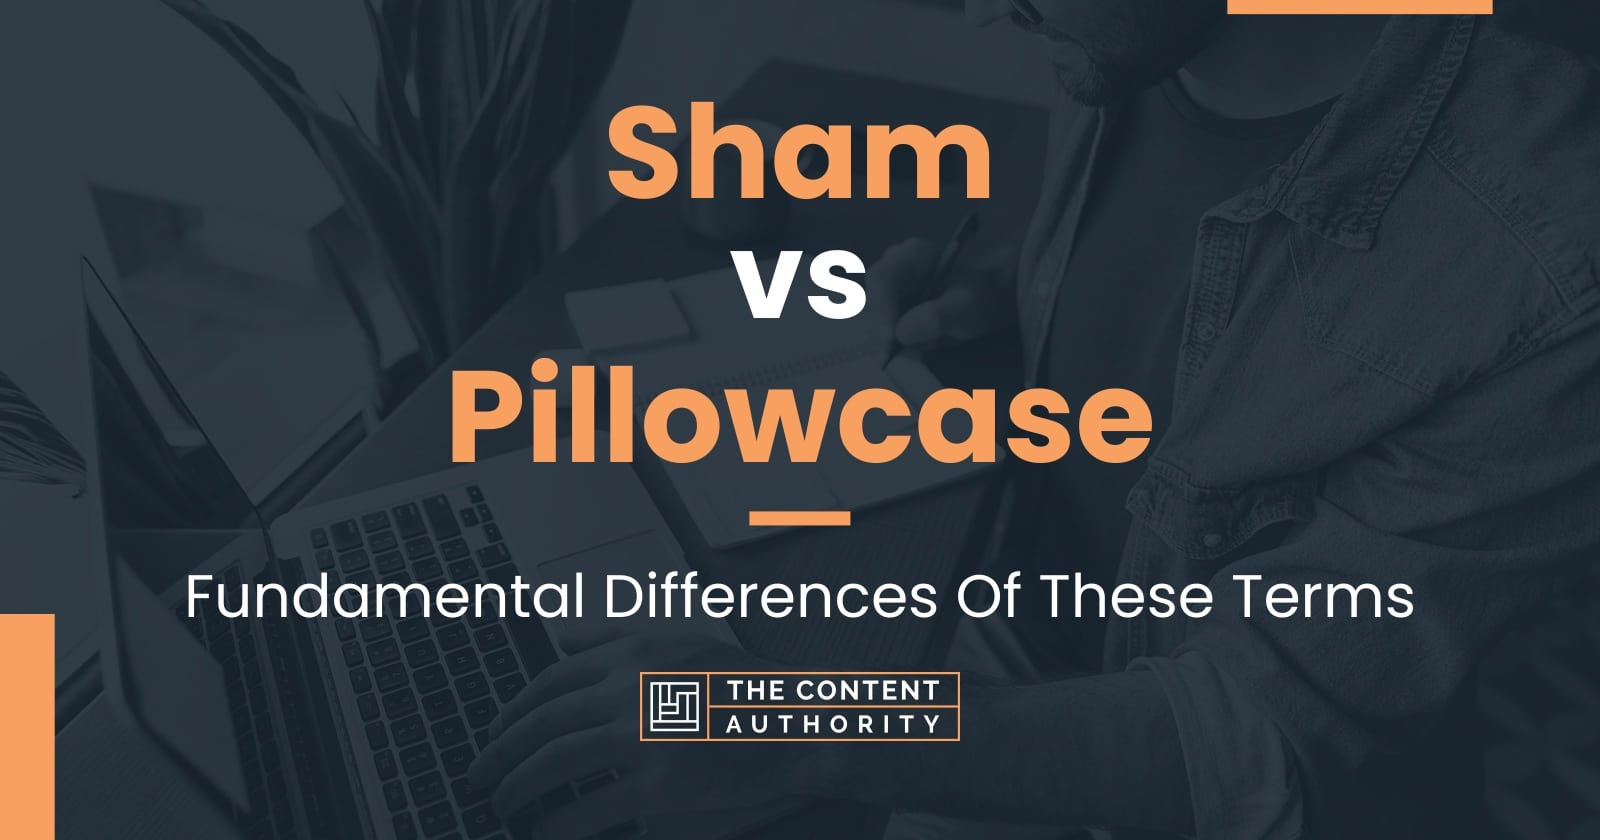 Sham vs Pillowcase: Fundamental Differences Of These Terms